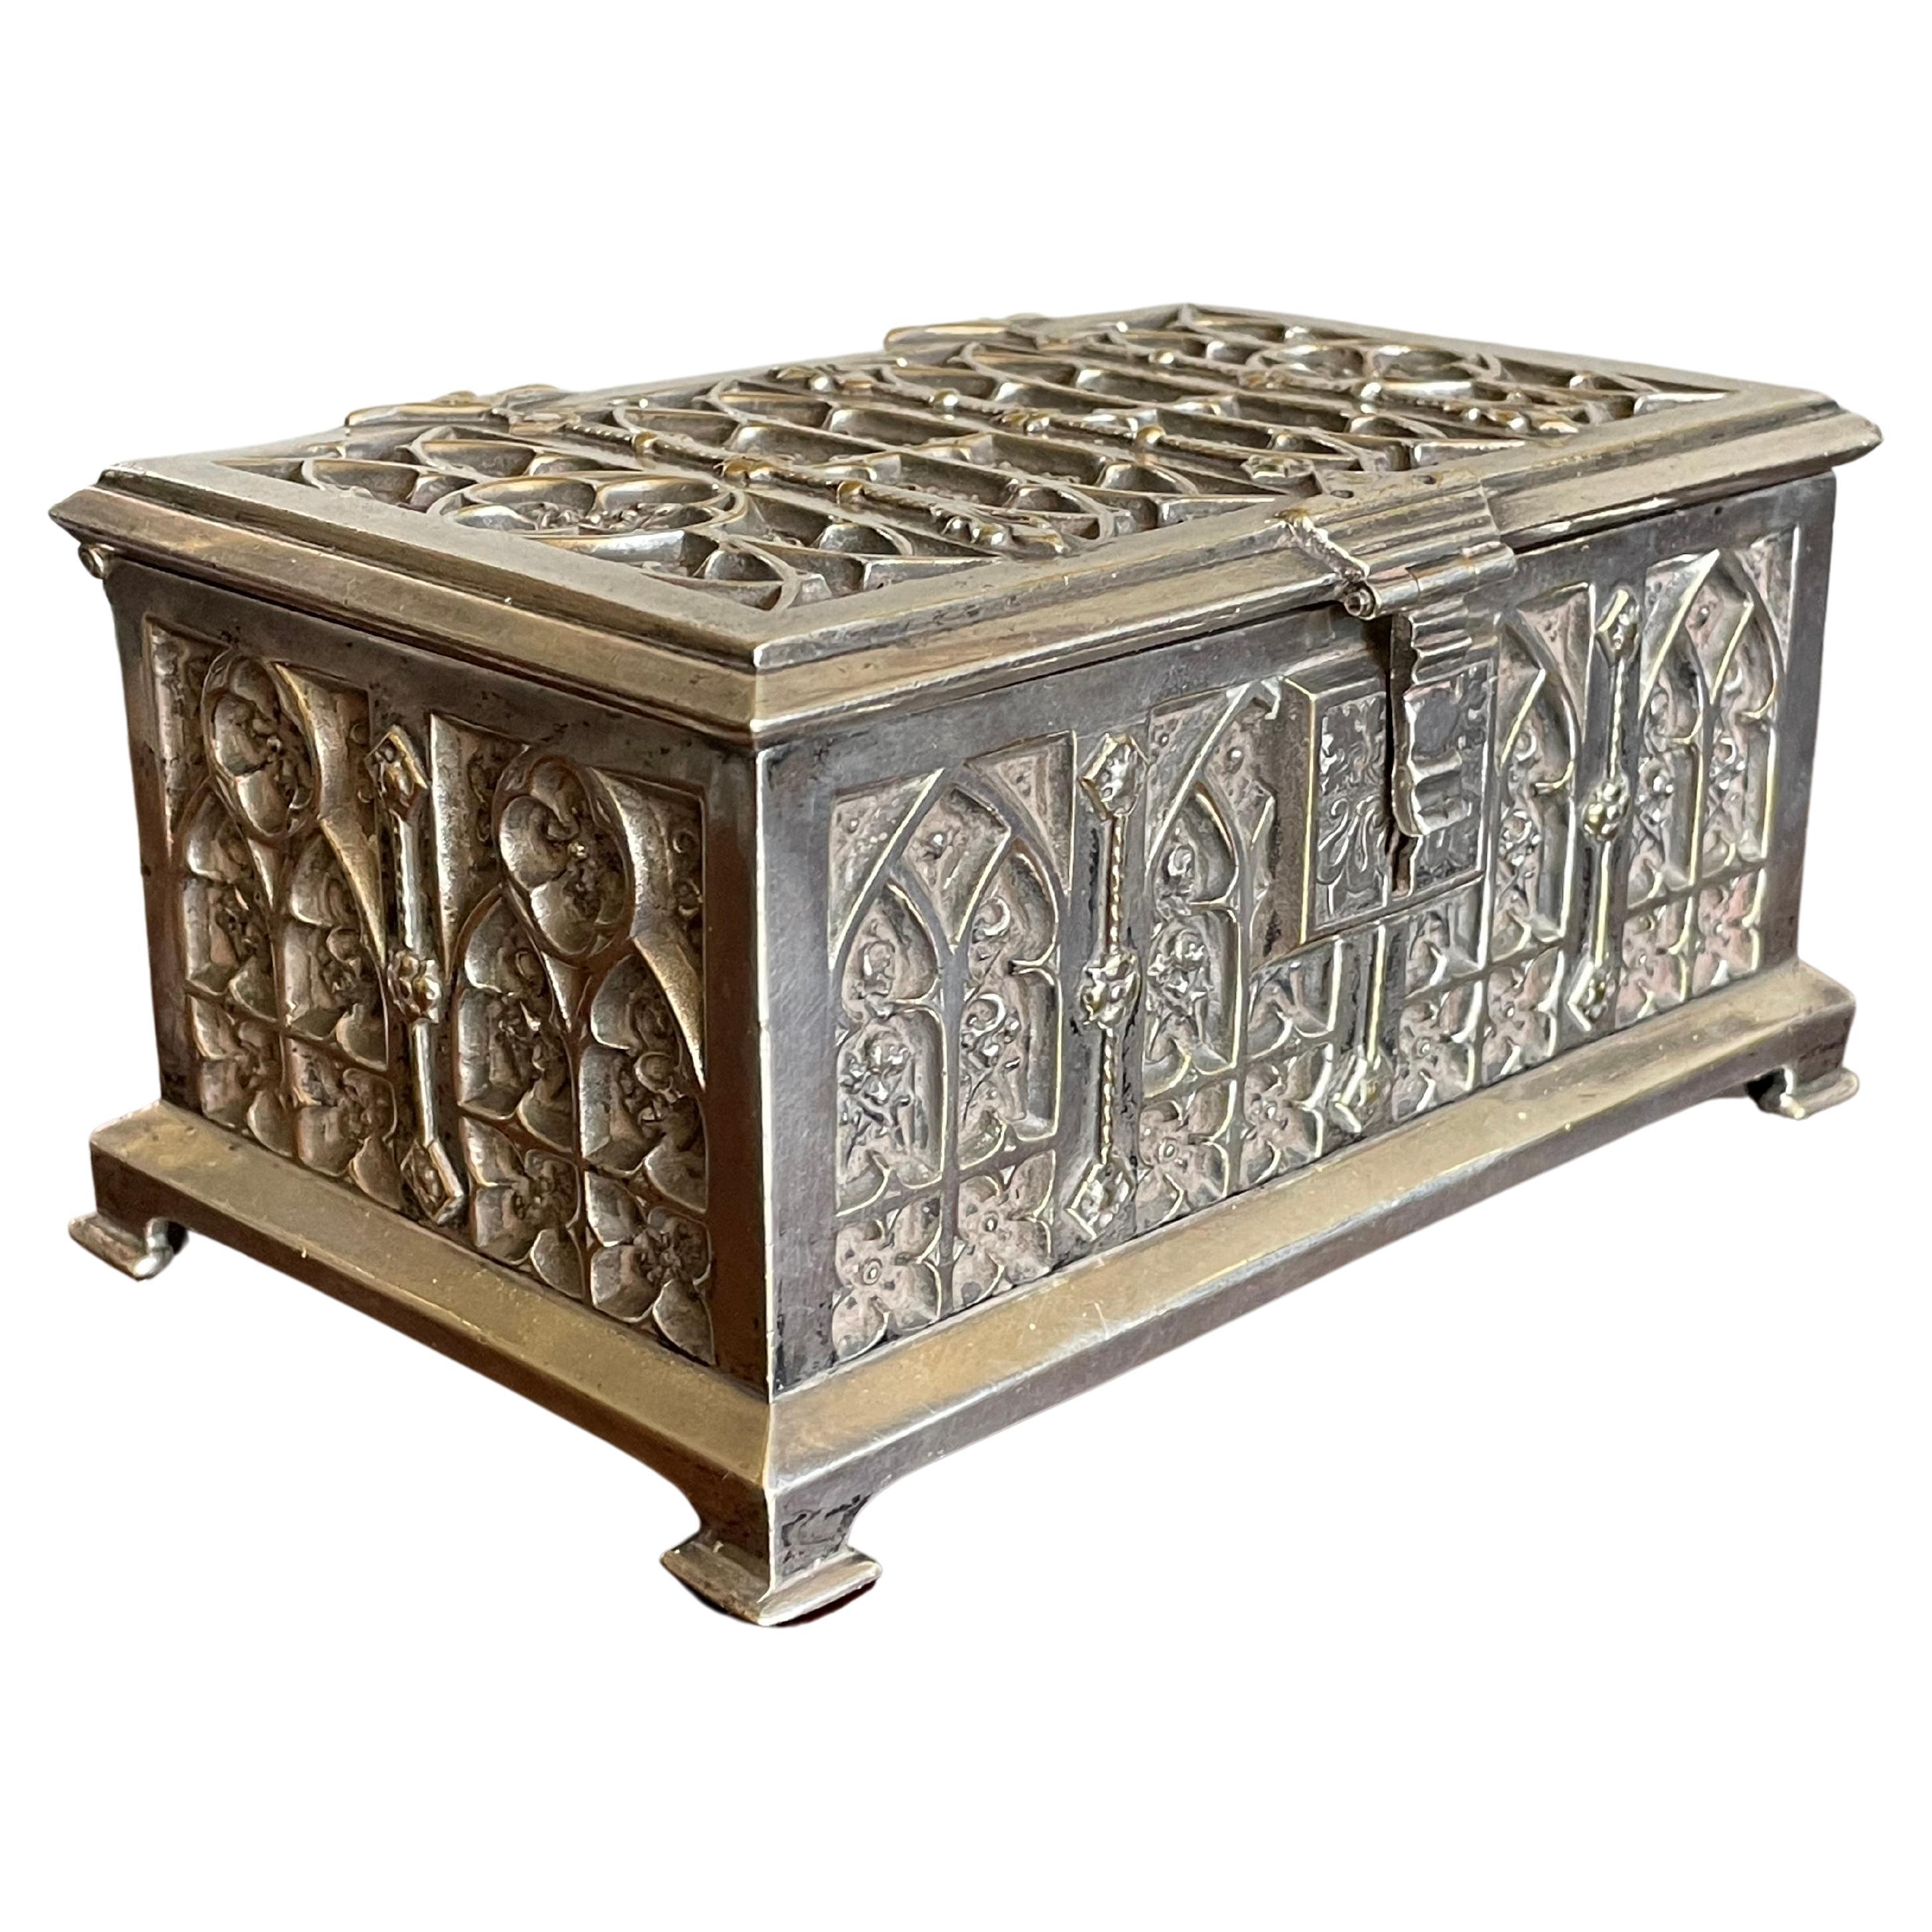 Stunning Gothic Revival Silvered Bronze Jewelry Box with Church Window Panels